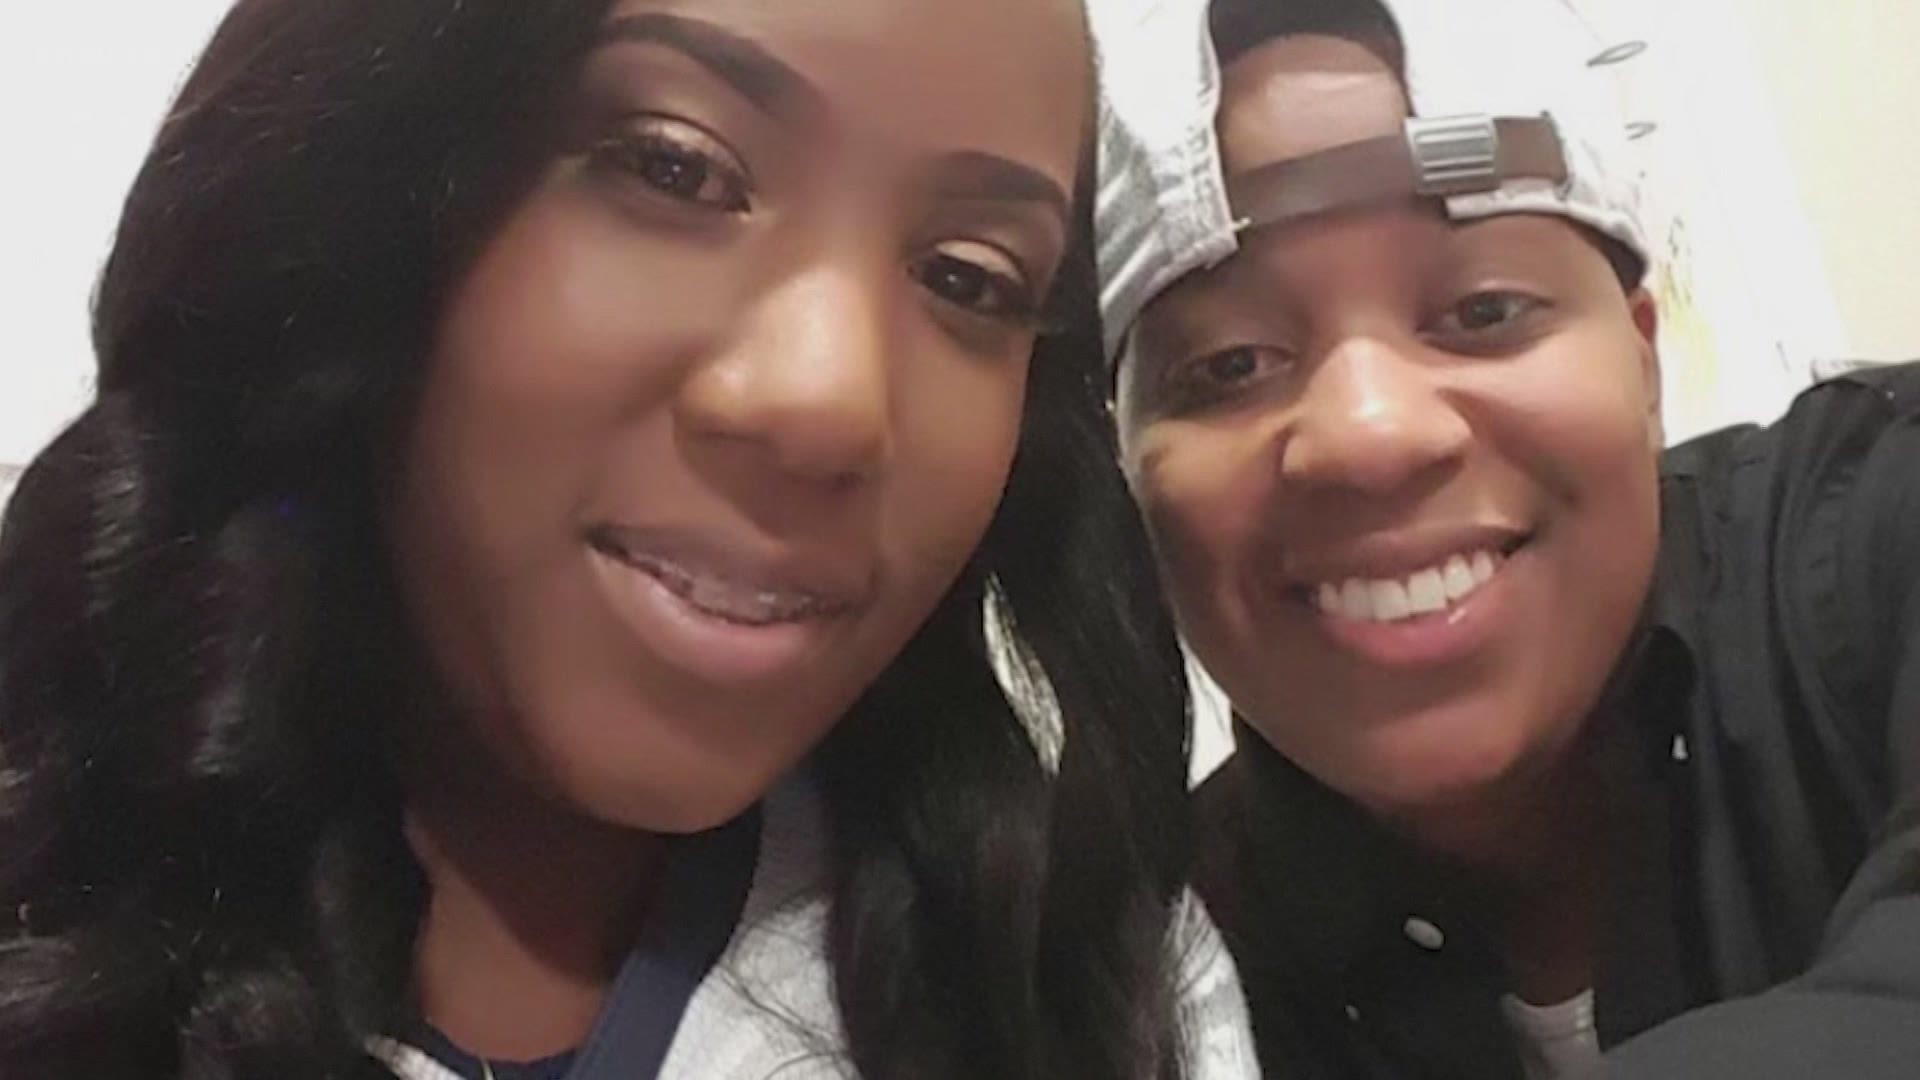 "They had a brand new home. They had a brand new baby." Now, Rhonda Clay is gone and her partner, Brittinie Green, is facing charges in her death.